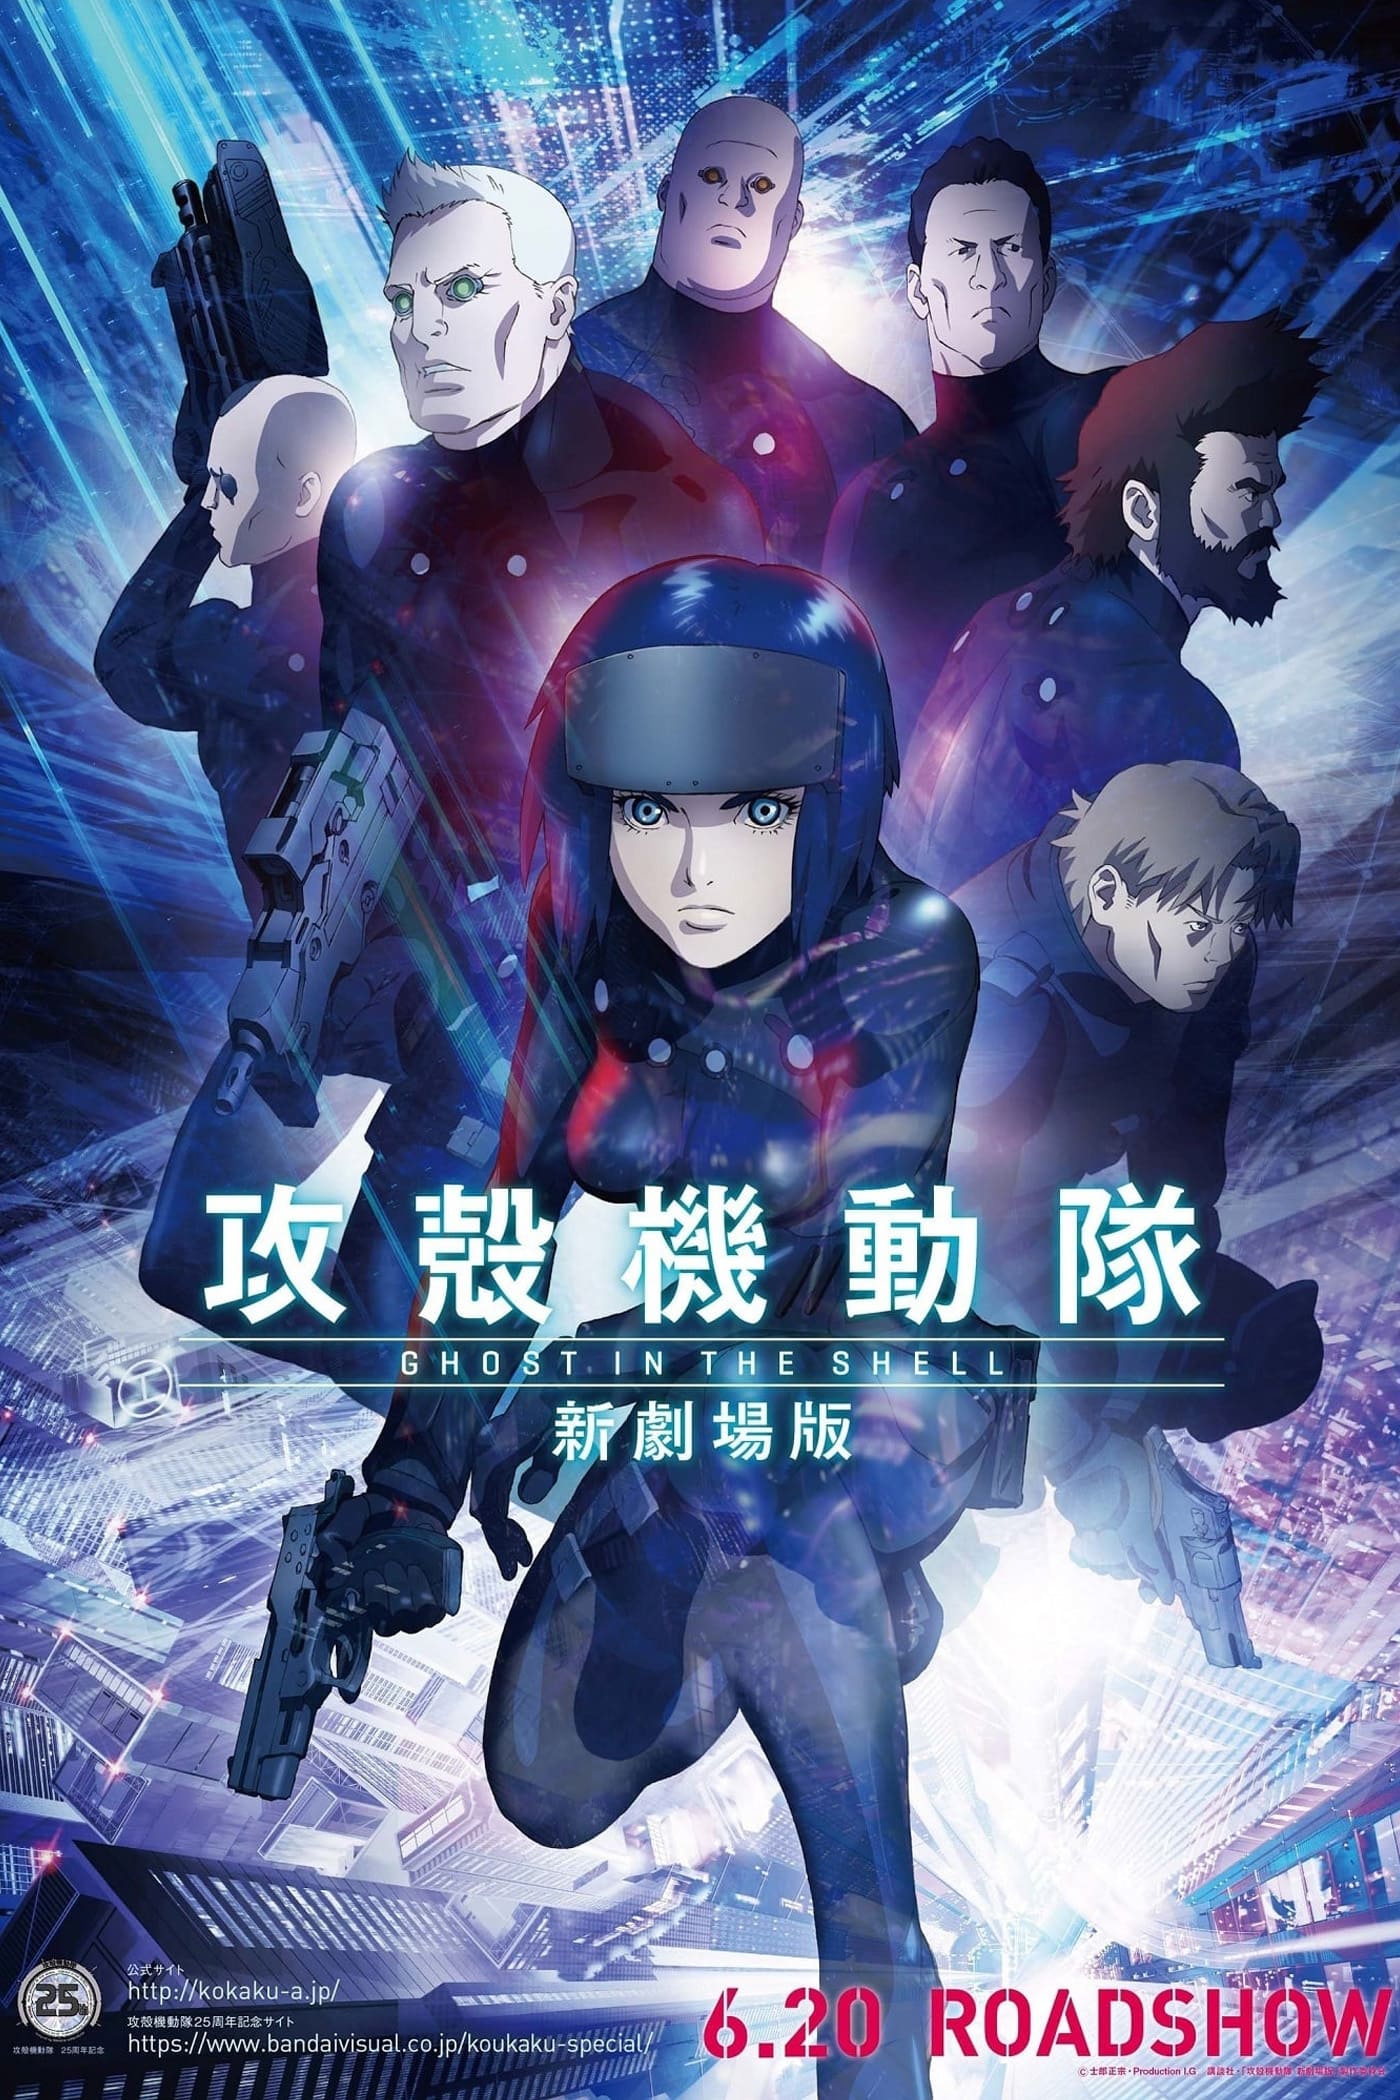 Banner Phim Vỏ Bọc Ma: Bộ Phim Mới (Ghost in the Shell: The New Movie)